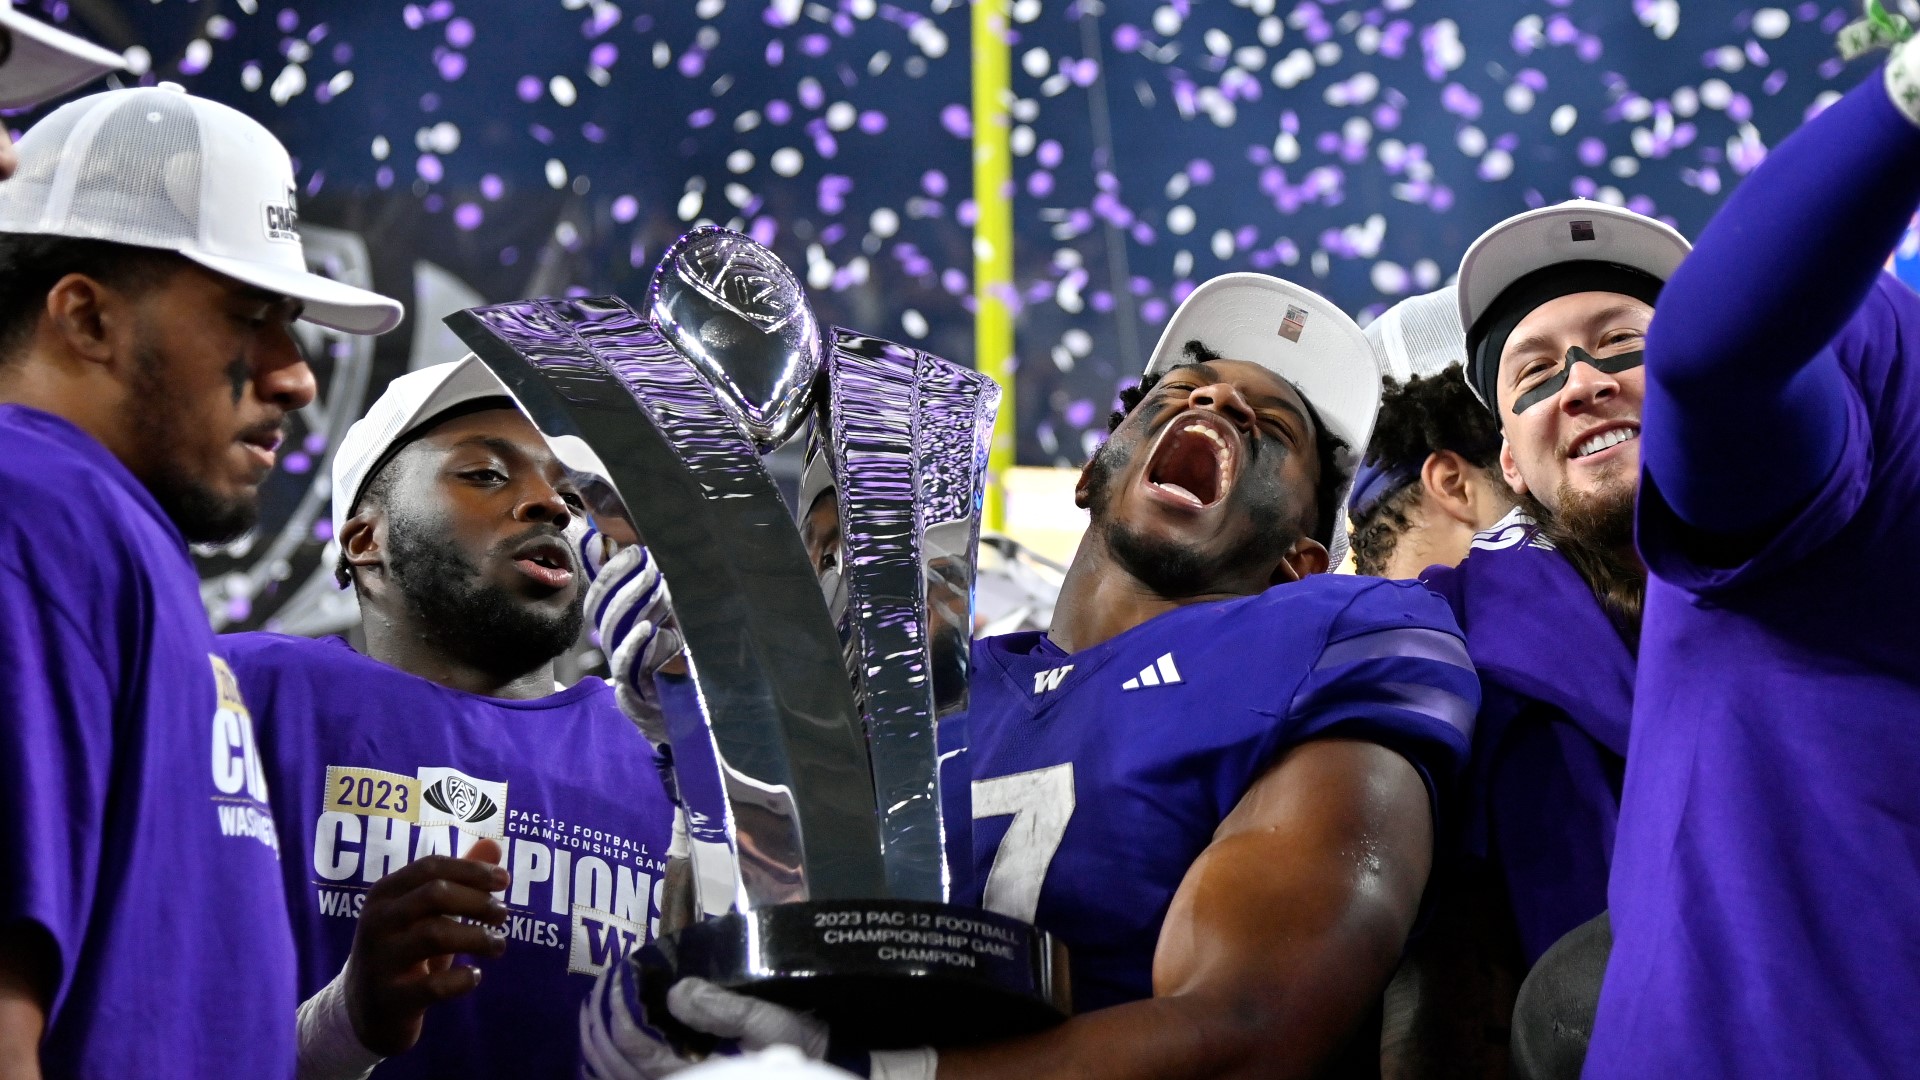 Washington Huskies wrapped up a spot in the College Football Playoff, beating No. 5 Oregon on Friday night in the Pac-12 Championship.